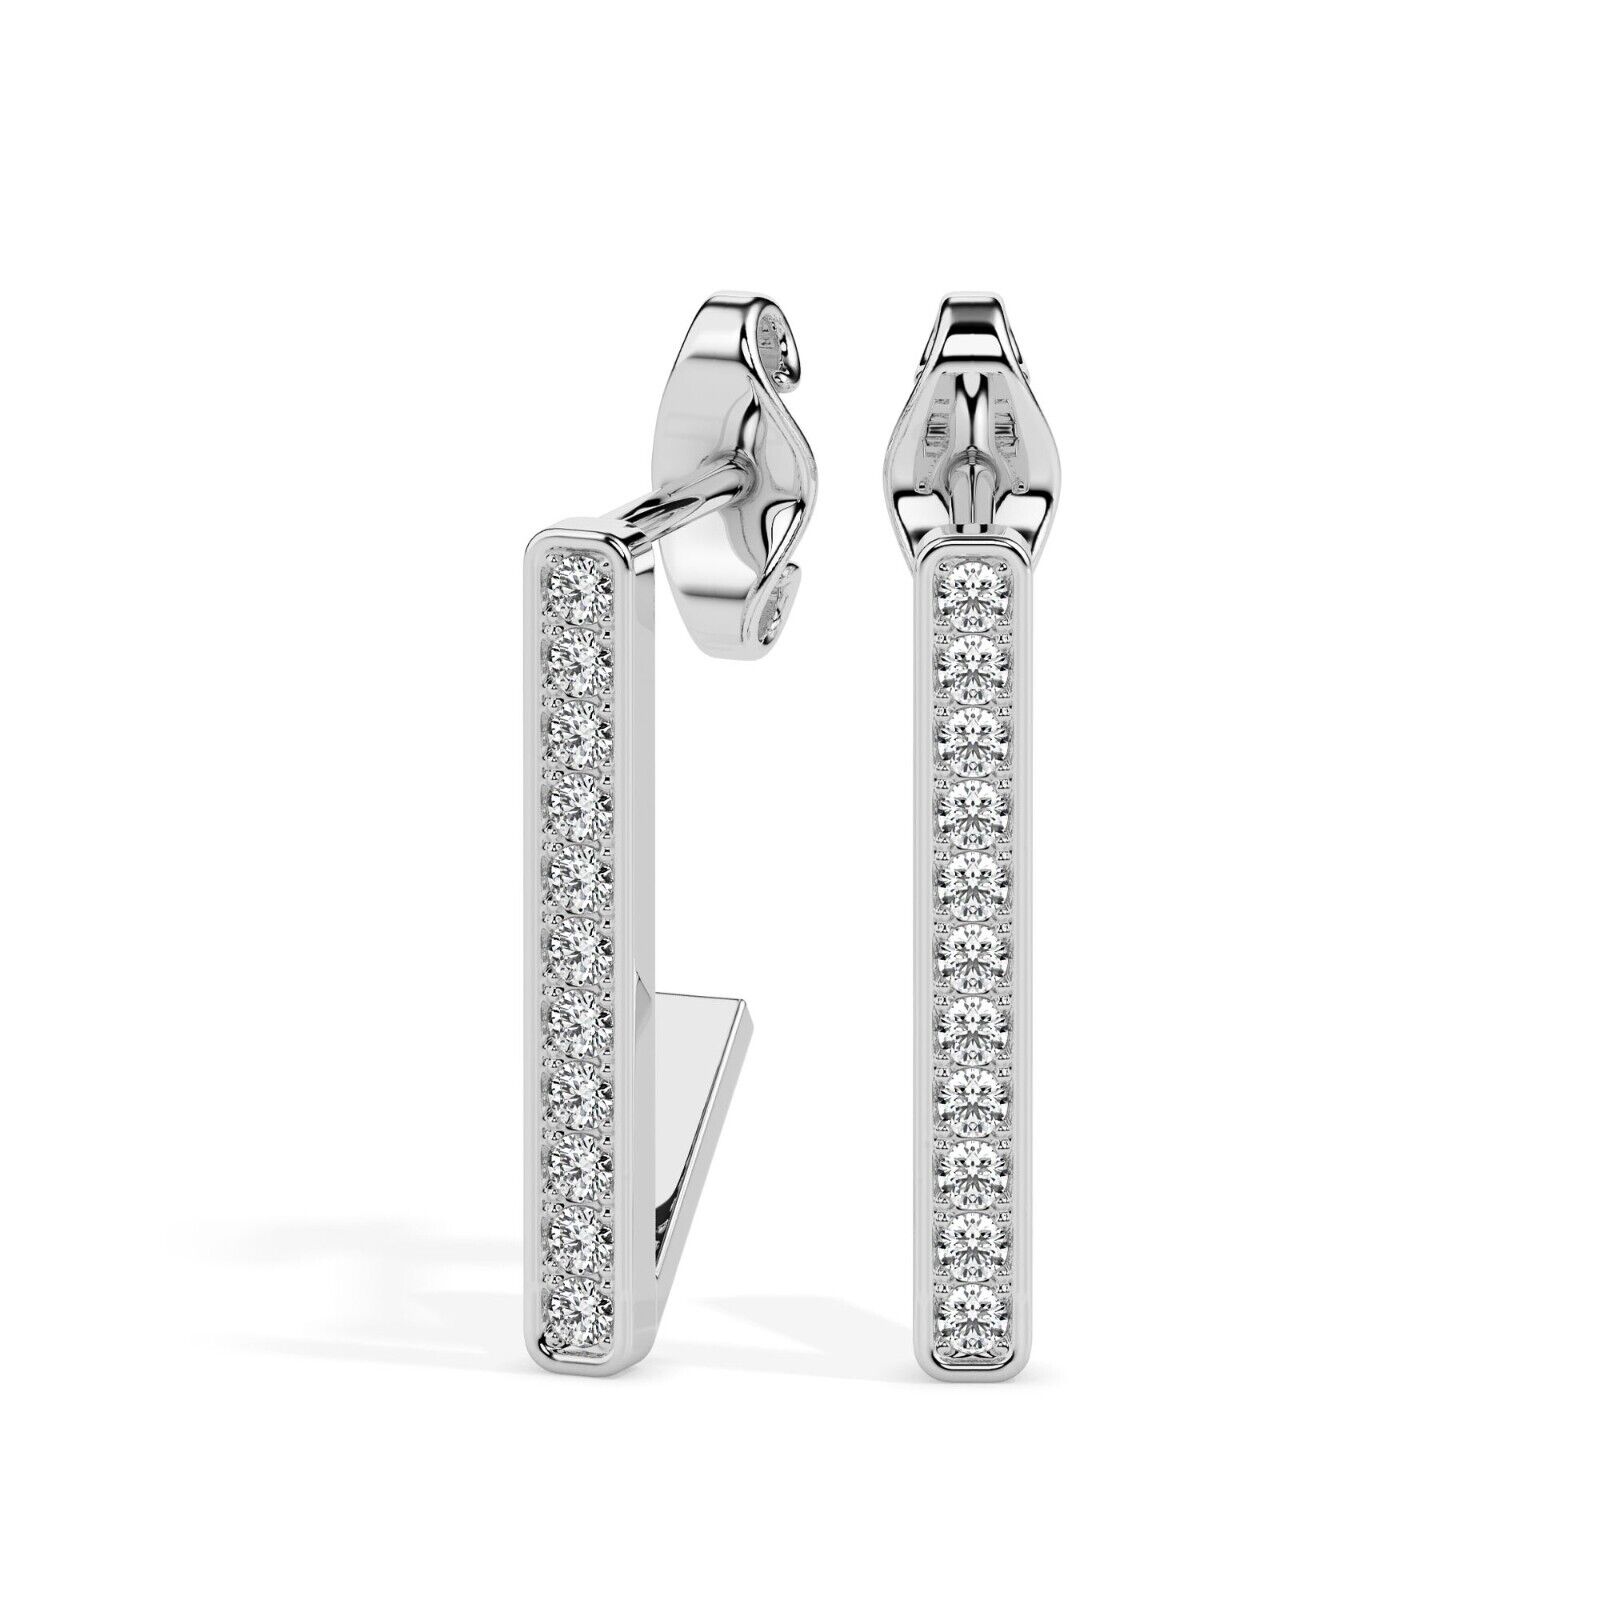 Fashionable 925 Sterling Silver White Gold Plated Luxury Earrings